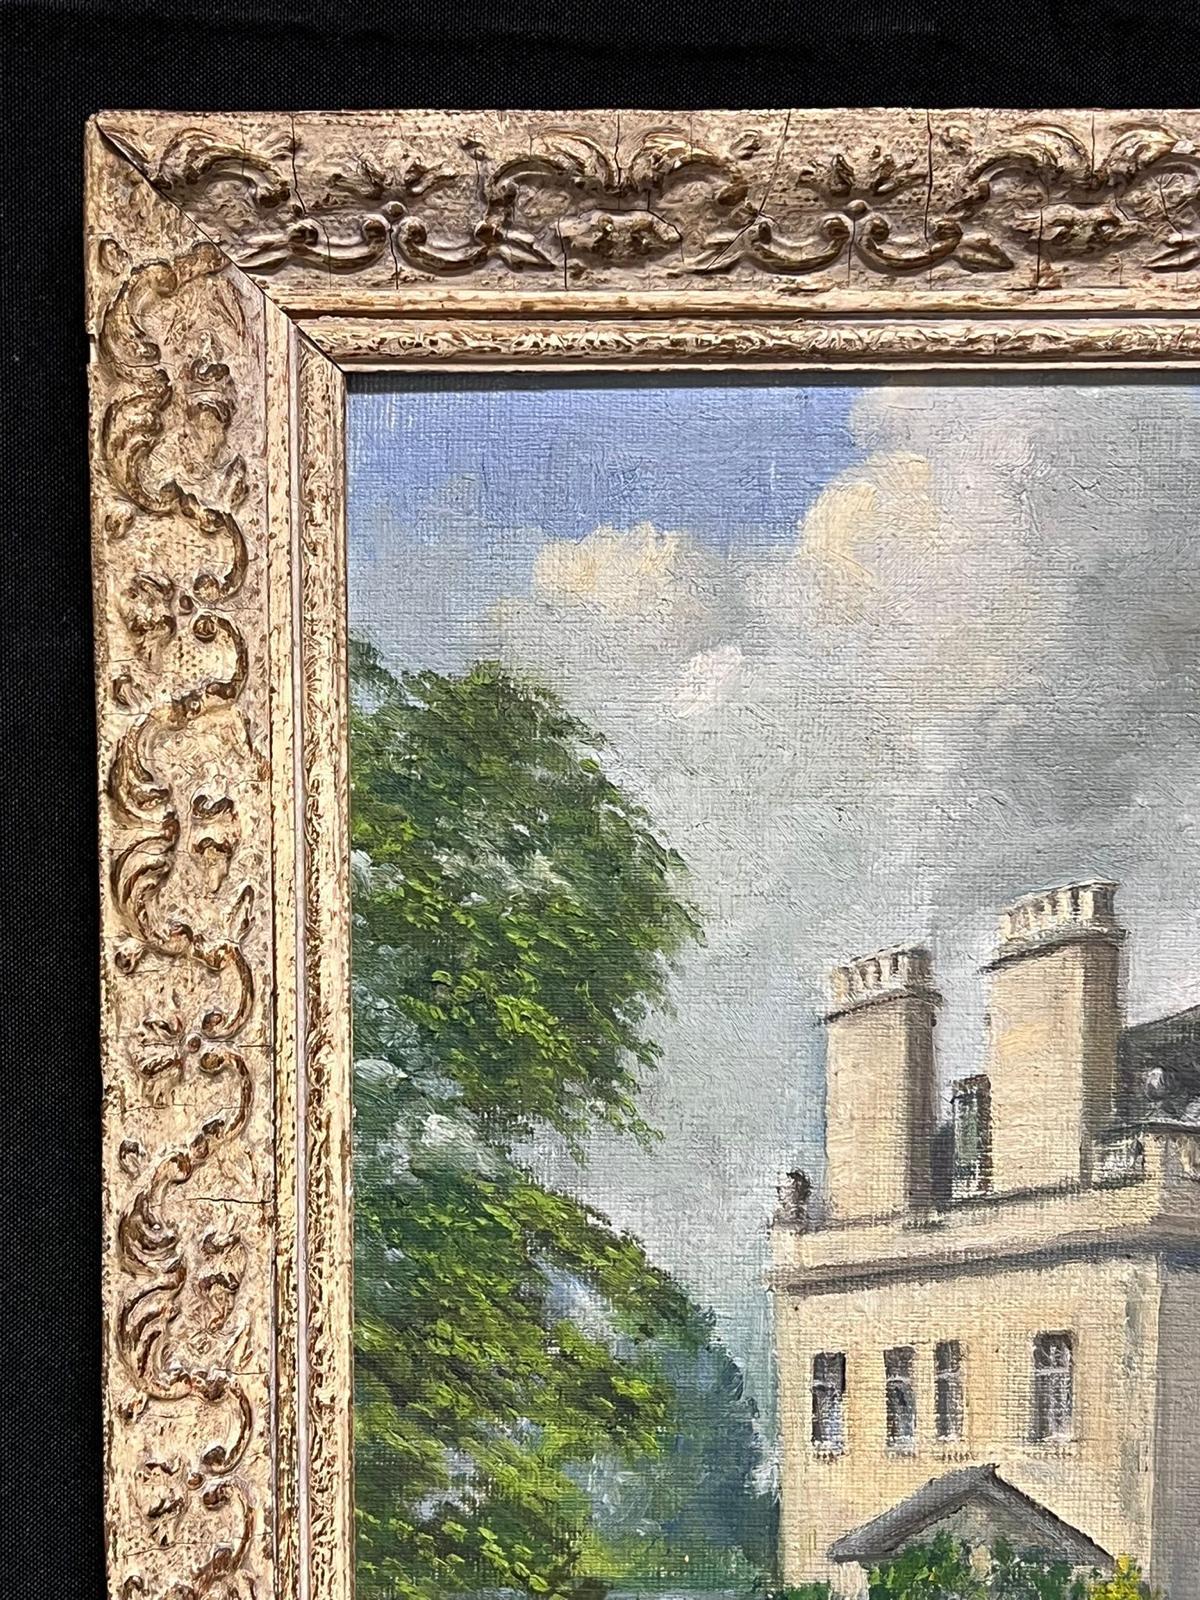 Faringdon House, Oxfordshire
English School, mid 20th century 
inscribed to label verso
oil on board, framed
framed: 19 x 23 inches
provenance: private collection, England
condition: very good and sound condition